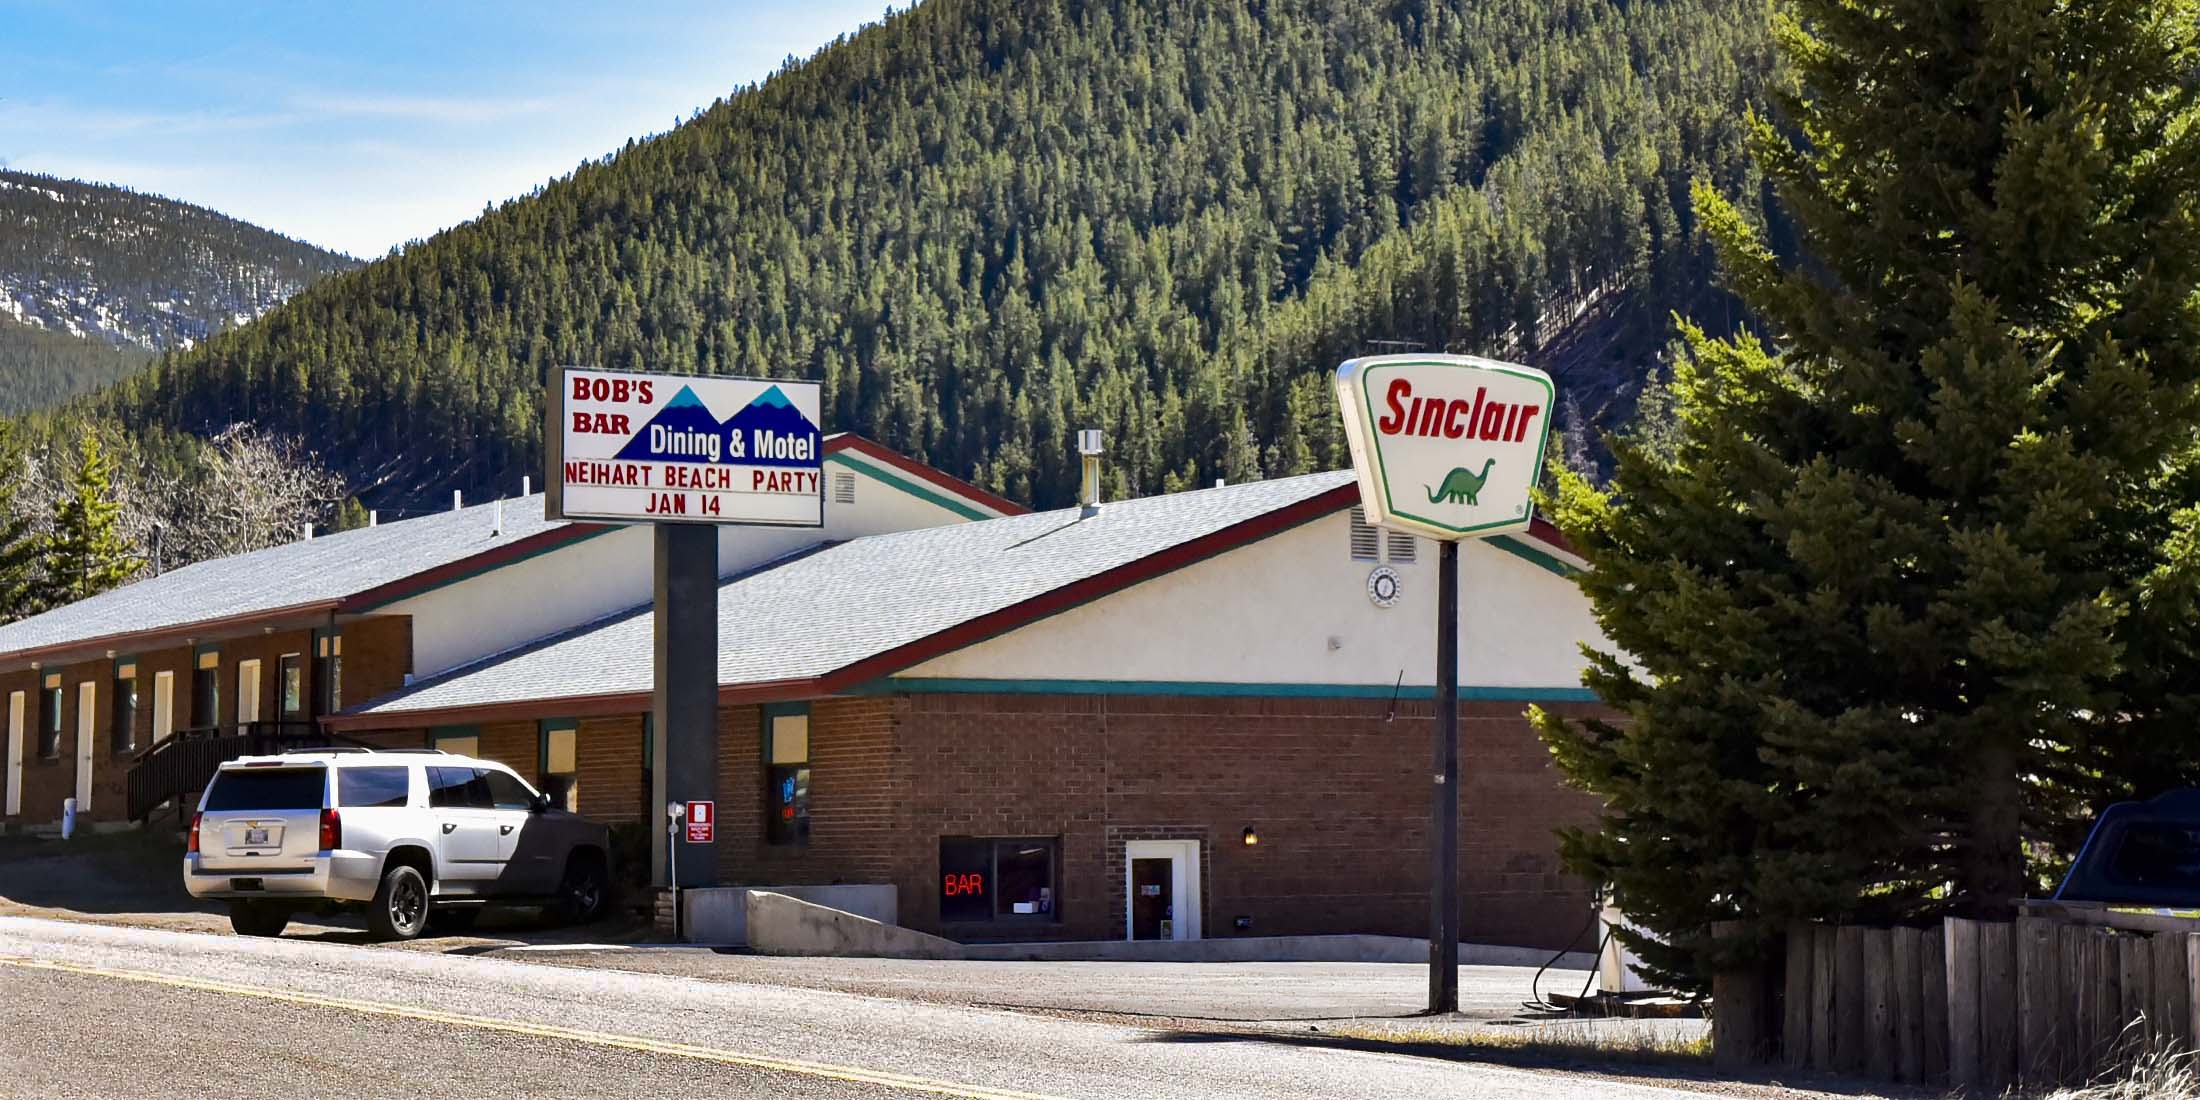 Bob's Bar and Dining is a great place to find food, drinks, lodging and good times in located in Neihart, Montana on Highway 89. 